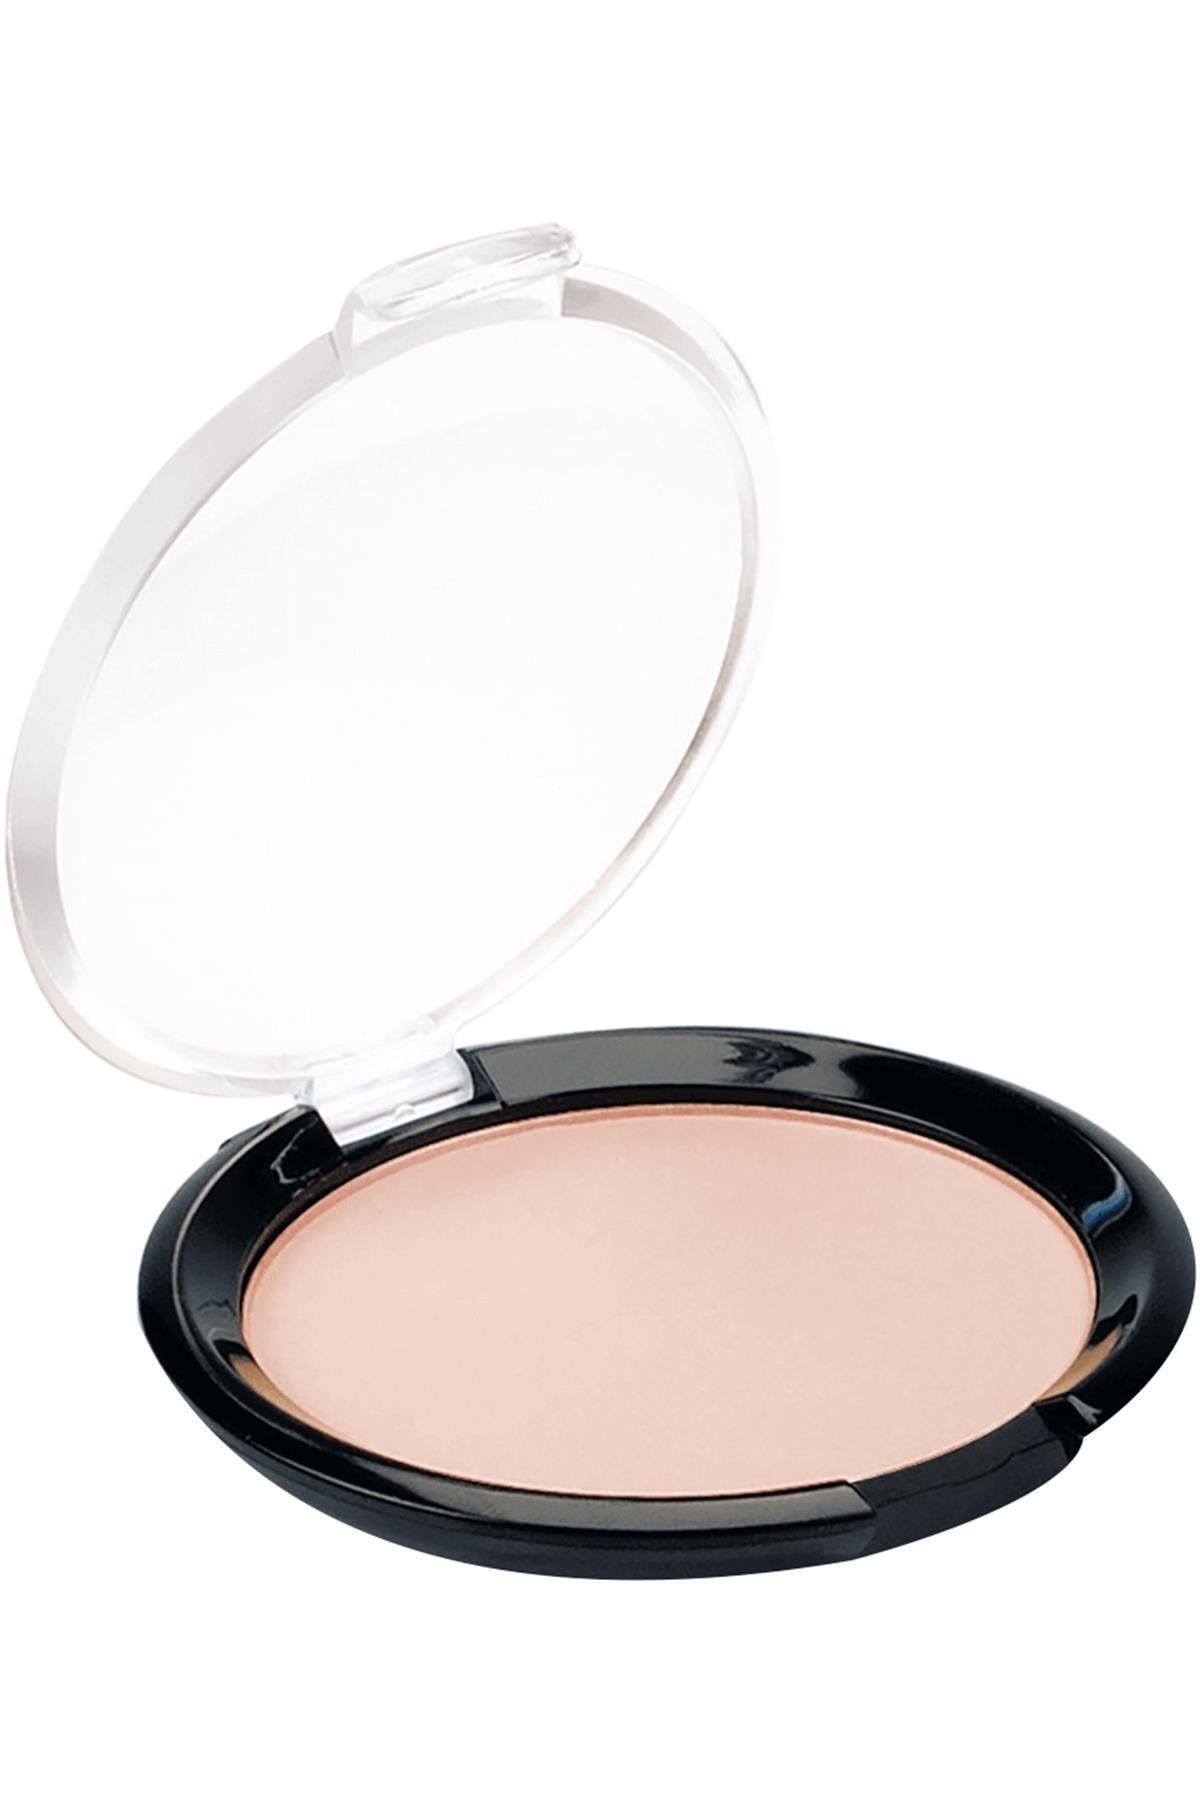 Golden Rose Marka: Silky Touch Compact Powder Pudra No:06 Kategori: Pudra